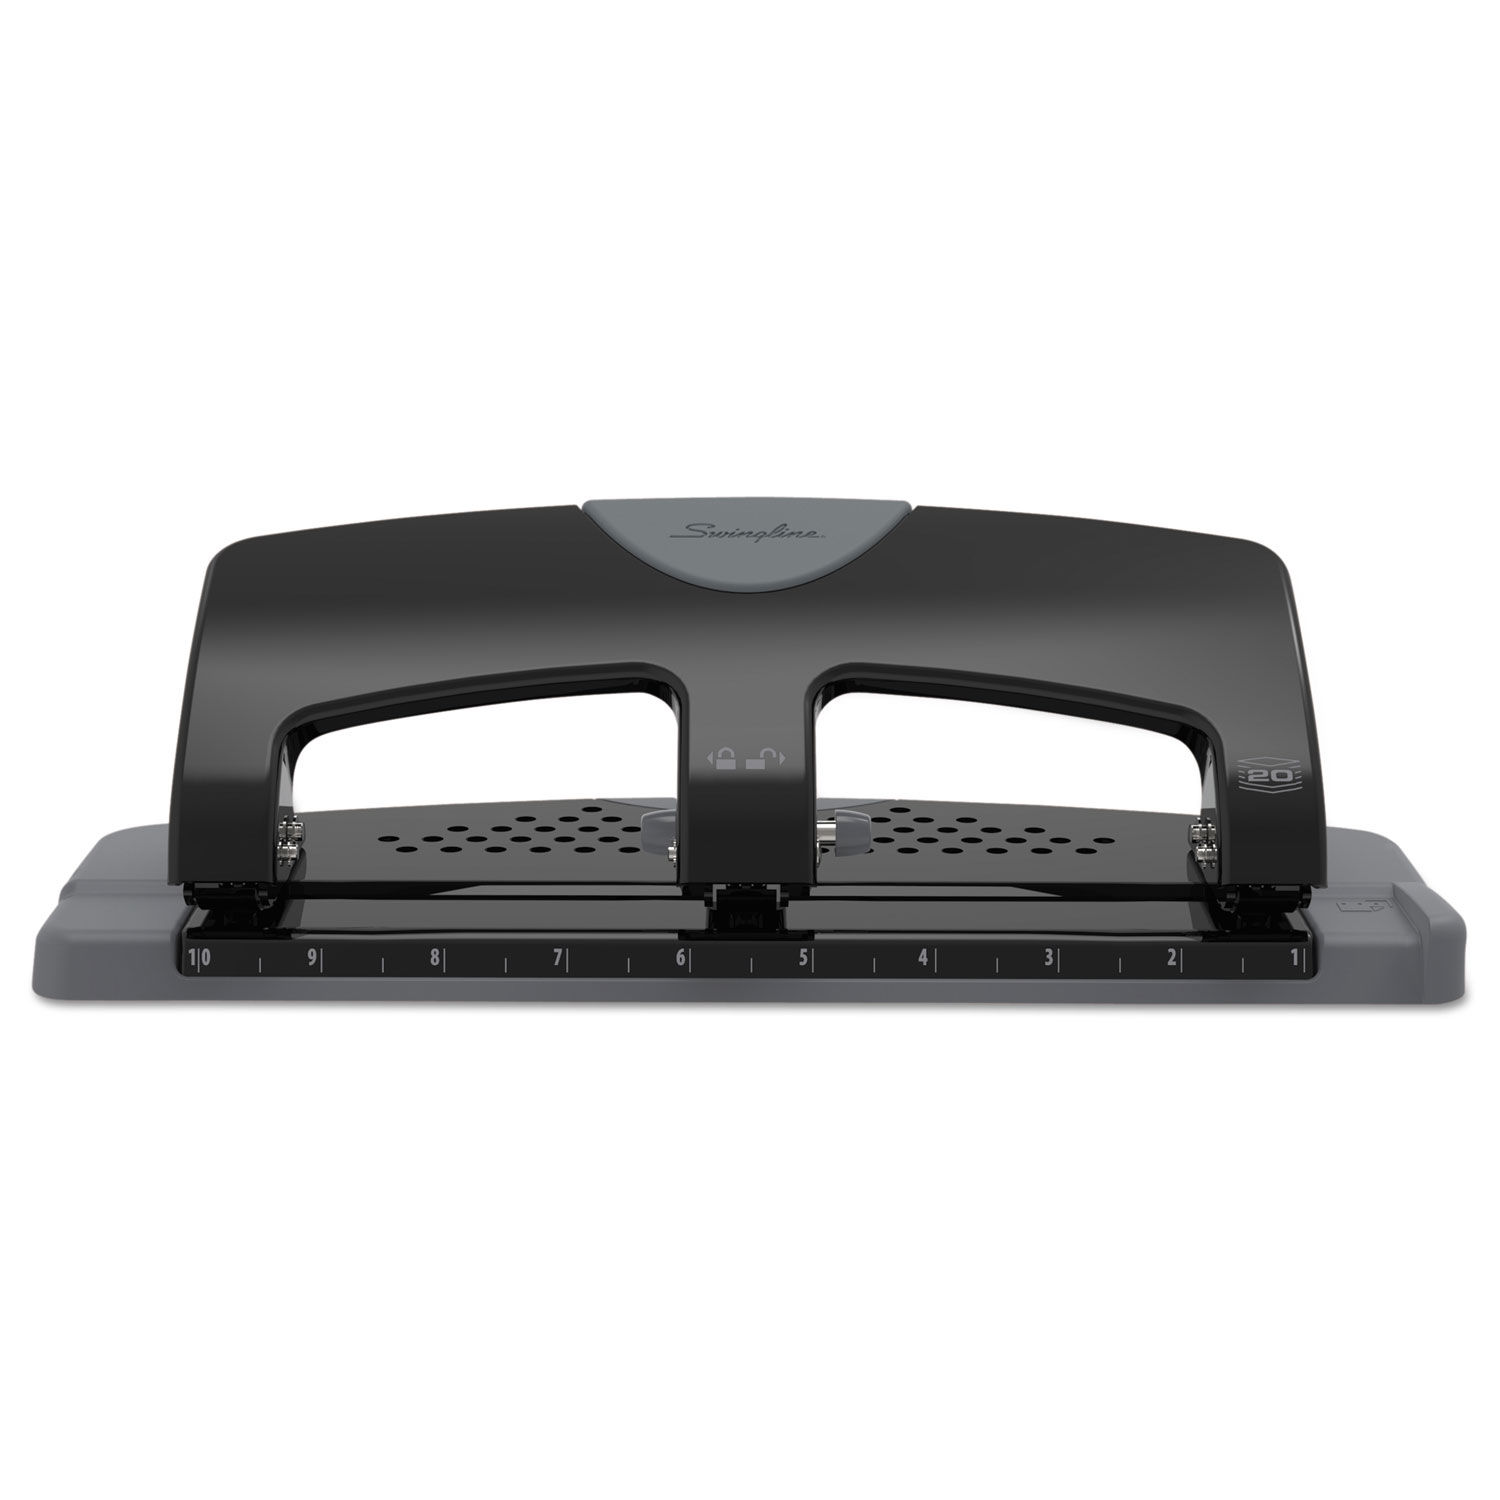 OfficeMax Fixed 3 Hole Punch 10 Sheet Black